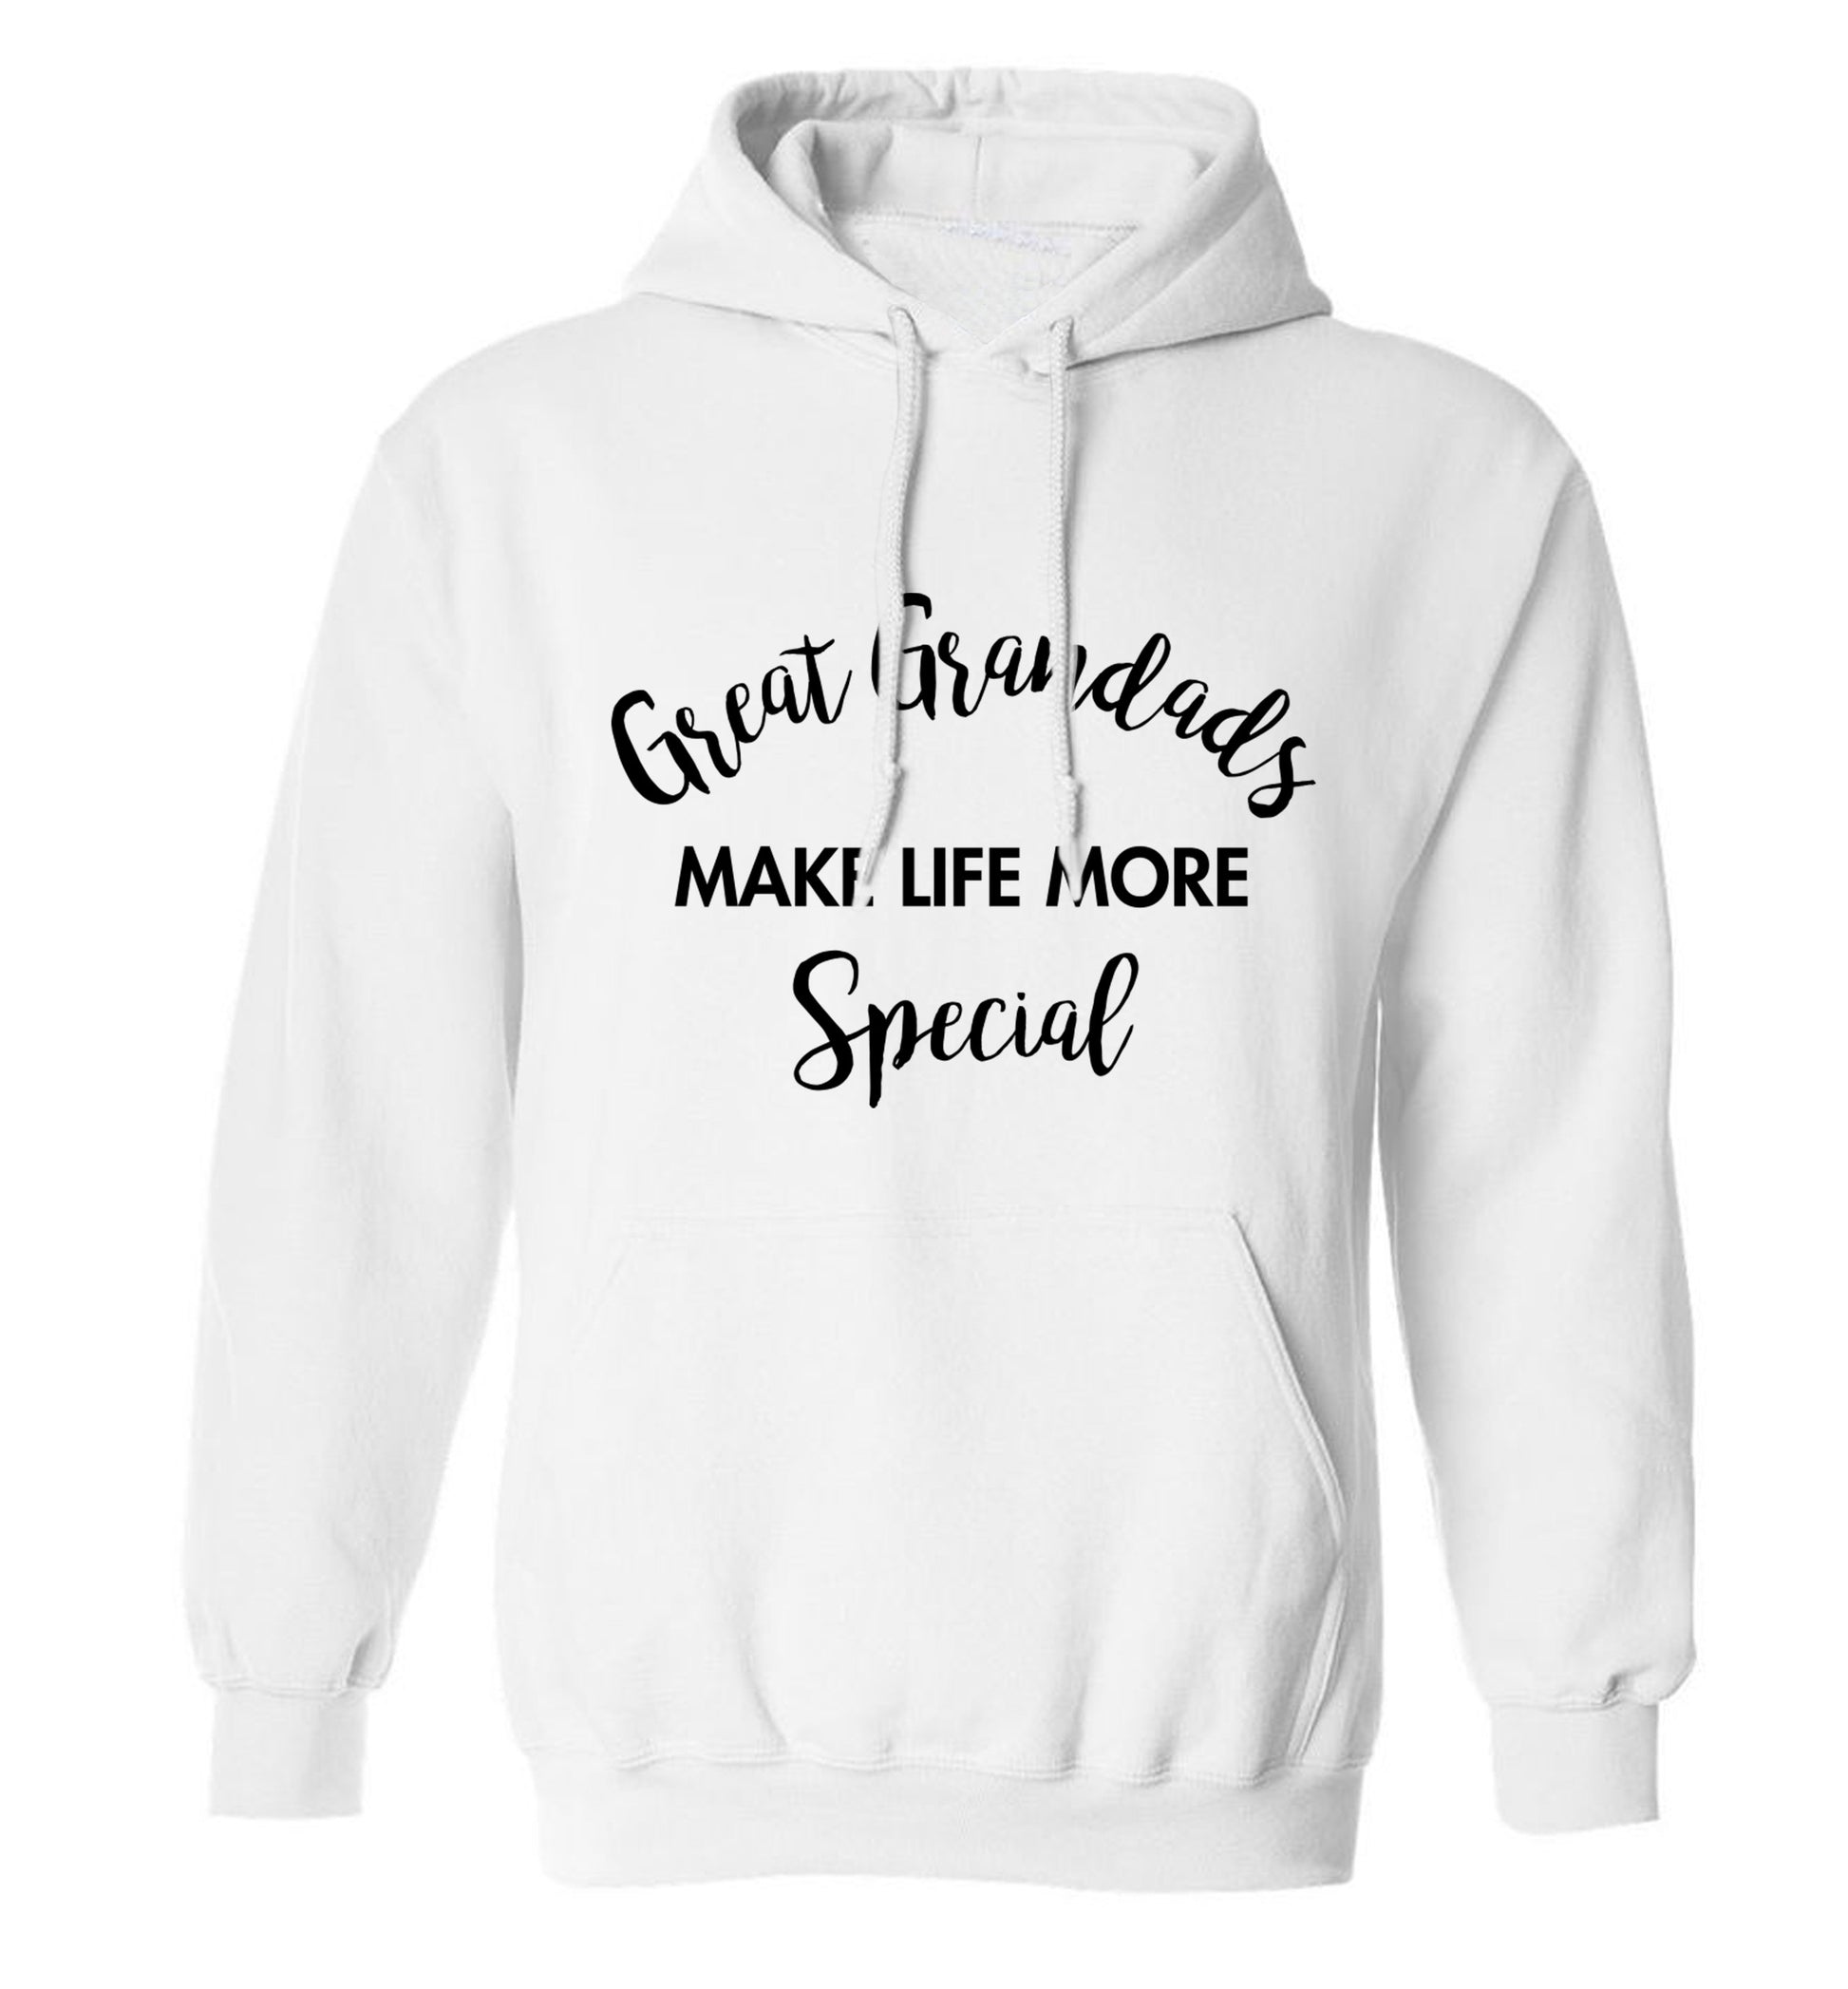 Great Grandads make life more special adults unisex white hoodie 2XL